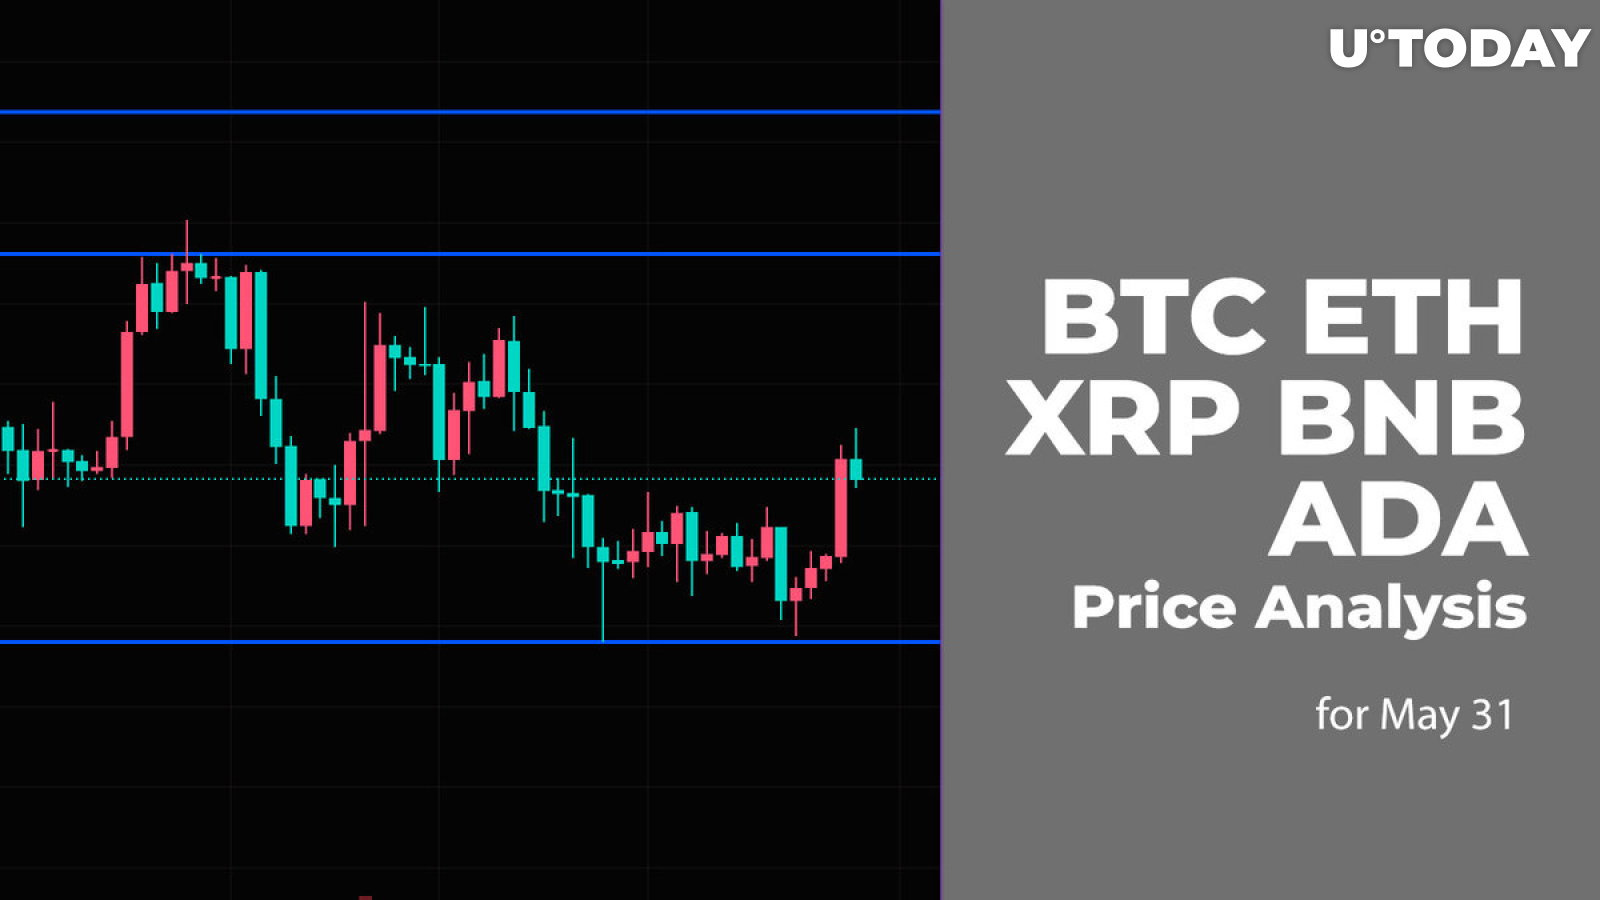 BTC, ETH, XRP, BNB and ADA Price Analysis for May 31